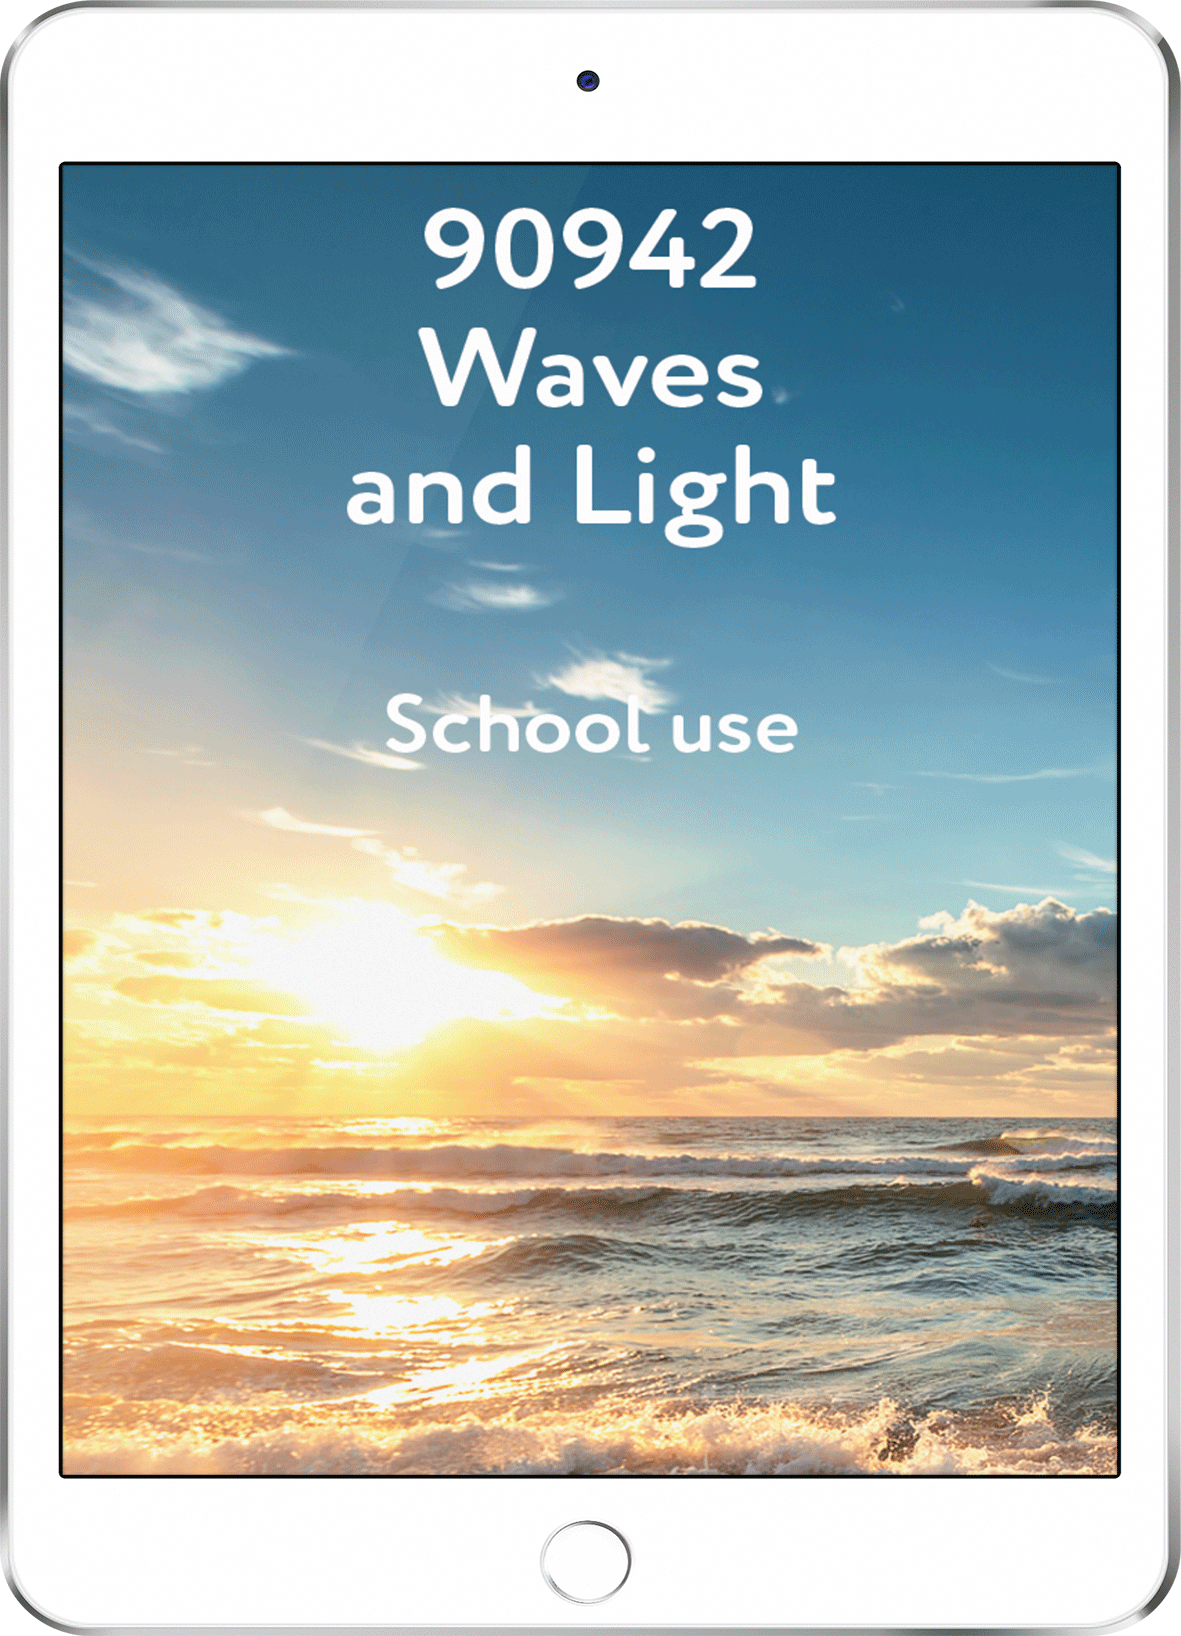 90942 Waves and Light - School Use